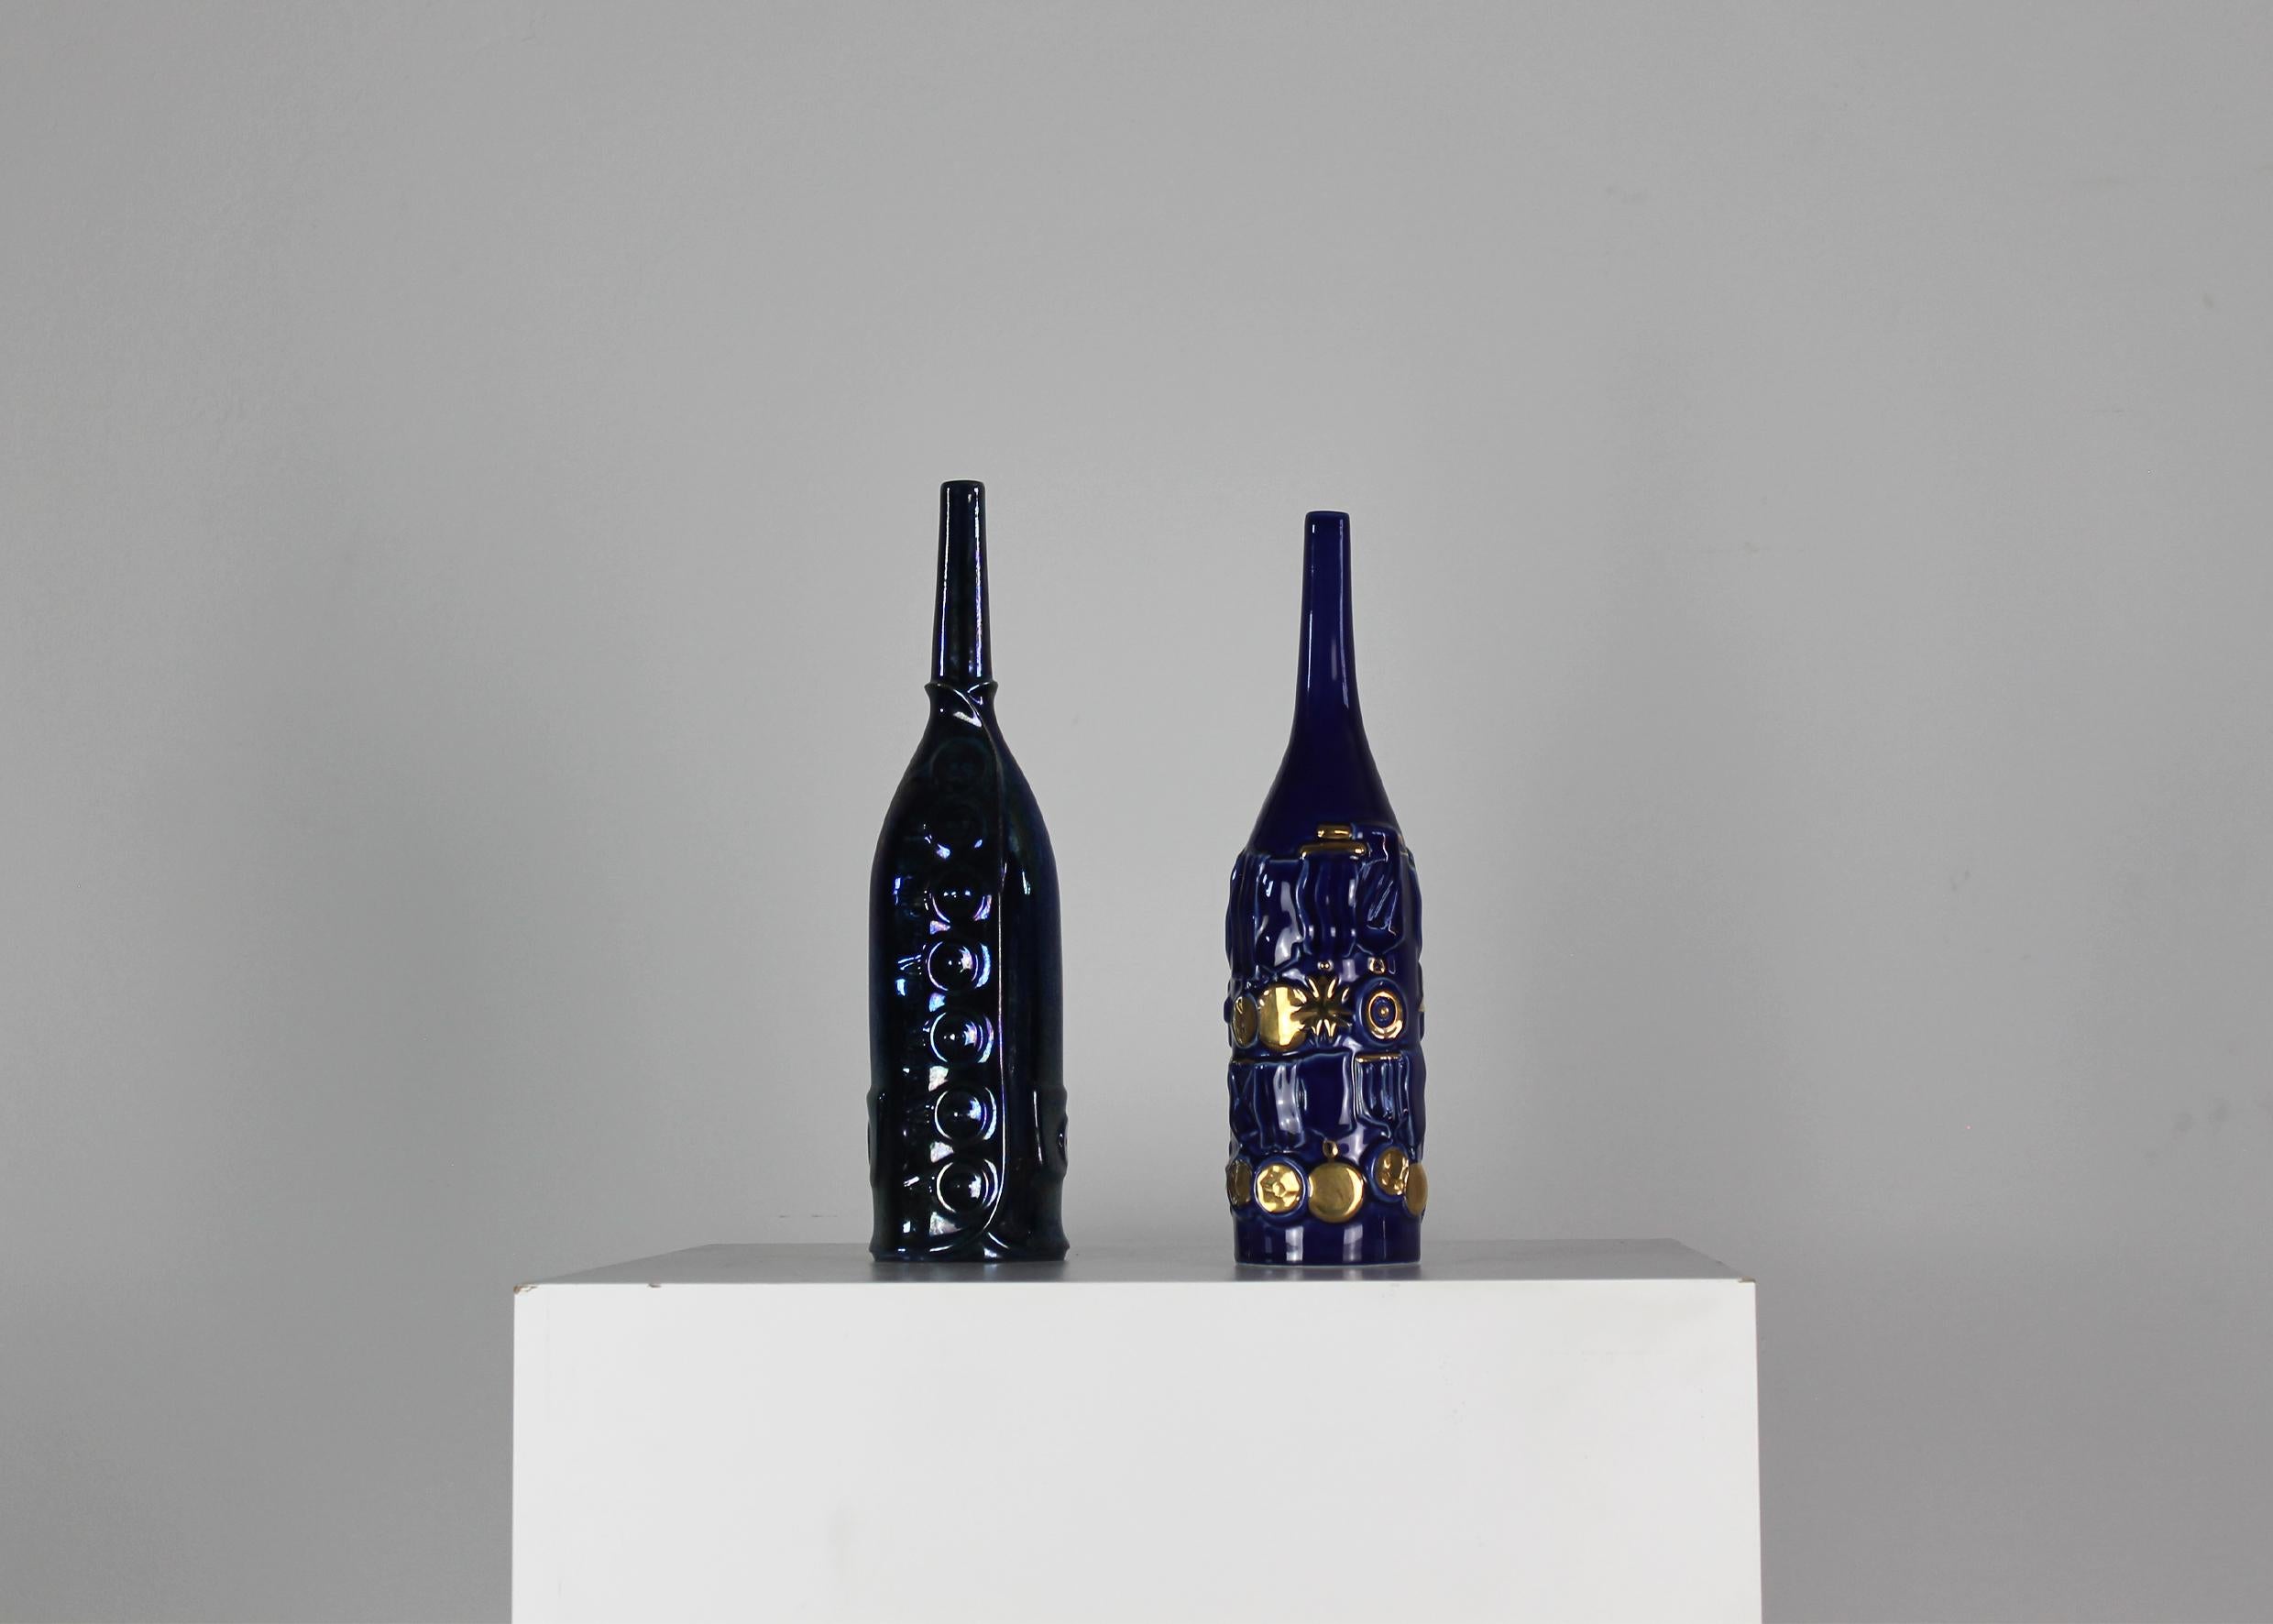 Set of two decorative blue bottles in ceramic with gold lusters decorations (realized by Bottega Gatti in Faenza) from the Bottiglie Abitate series which is designed by Gio Ponti in the 1950s and manufactured during the 1990s by Cooperativa Ceramica